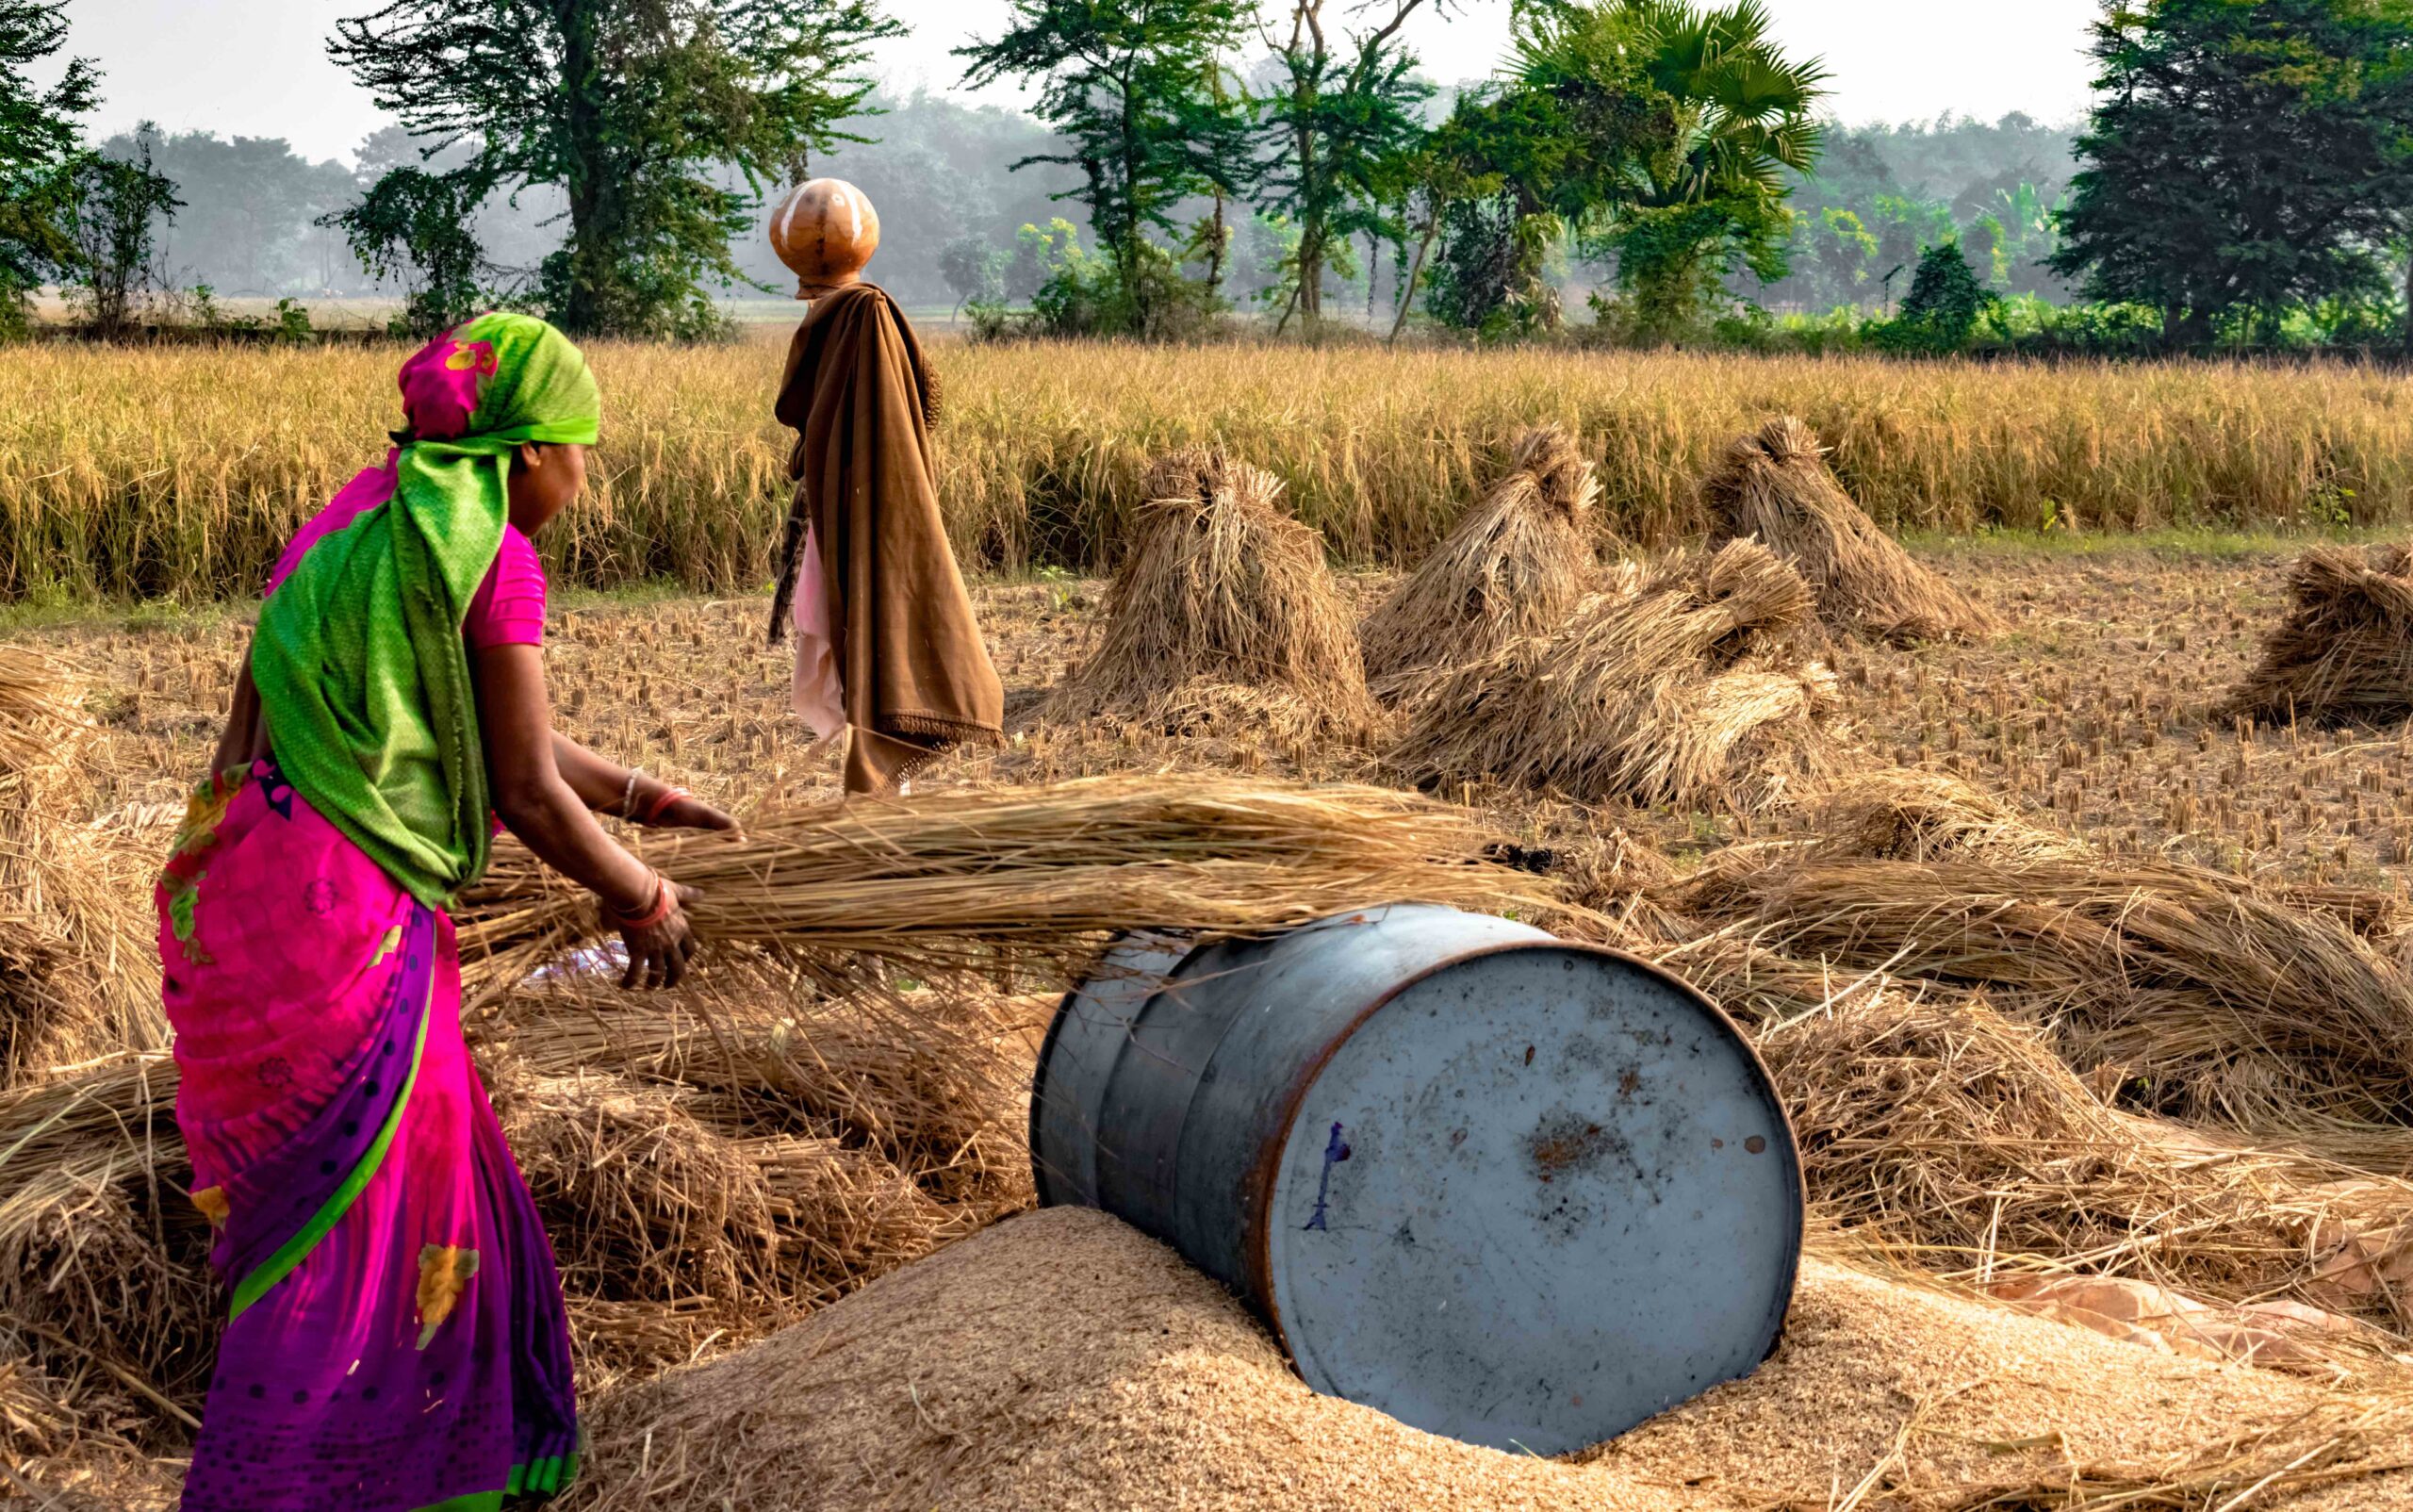 Shaping global agendas: The IFPRI Food Security Portal’s pathways to impact